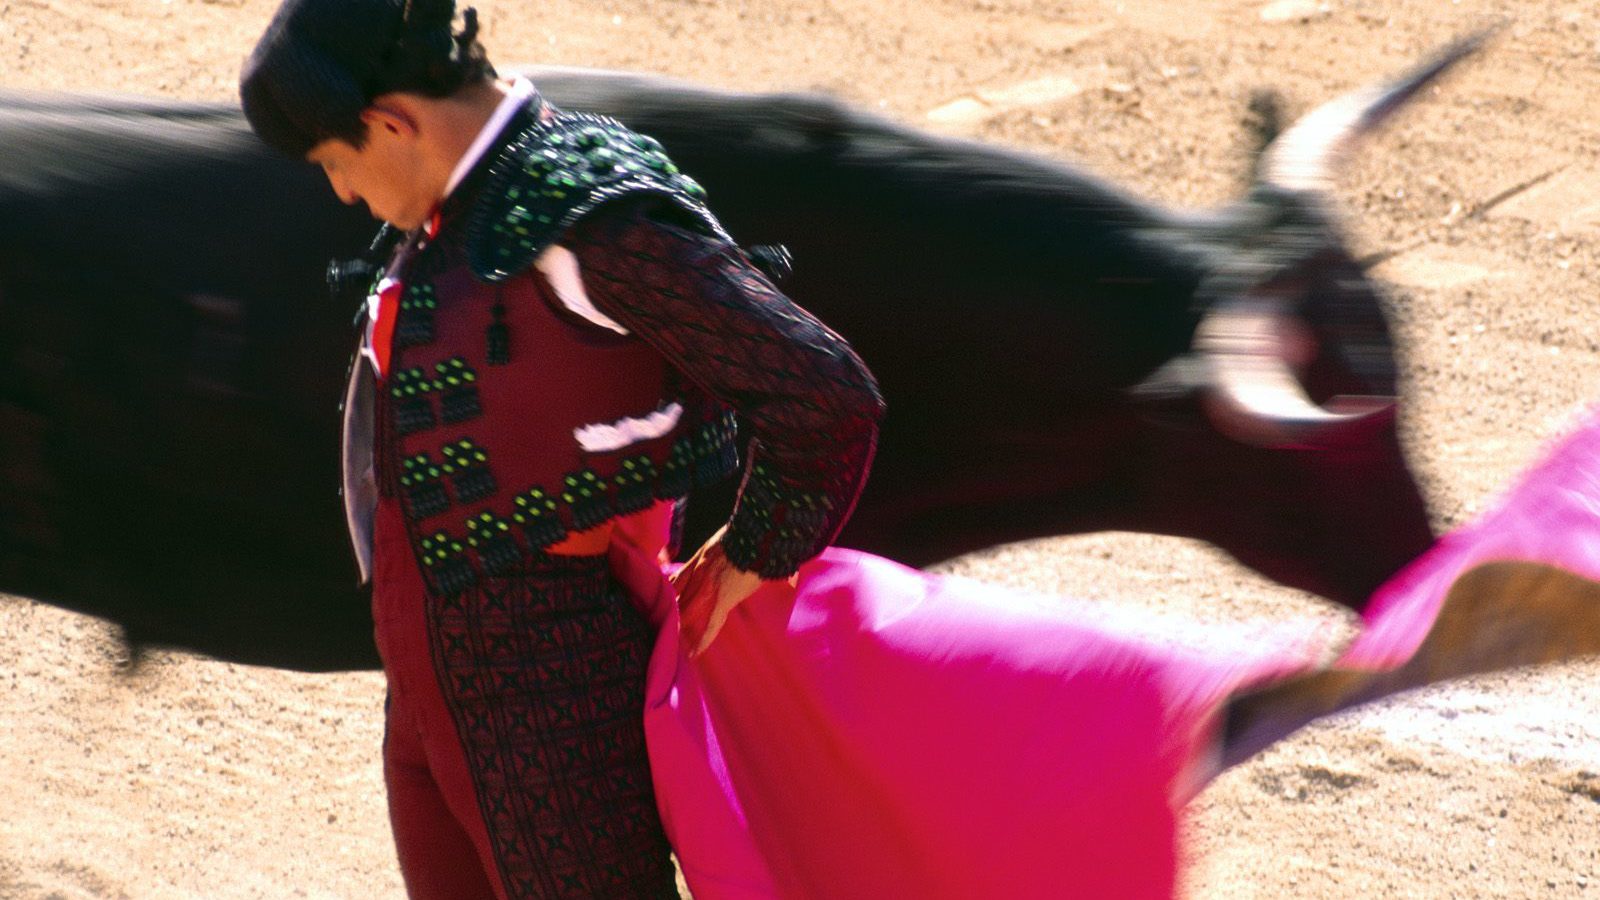 Bull Fighter HD+1600×900, UXGA 1600×1200 – HD Wallpapers Backgrounds Desktop, iphone & Android Free Download